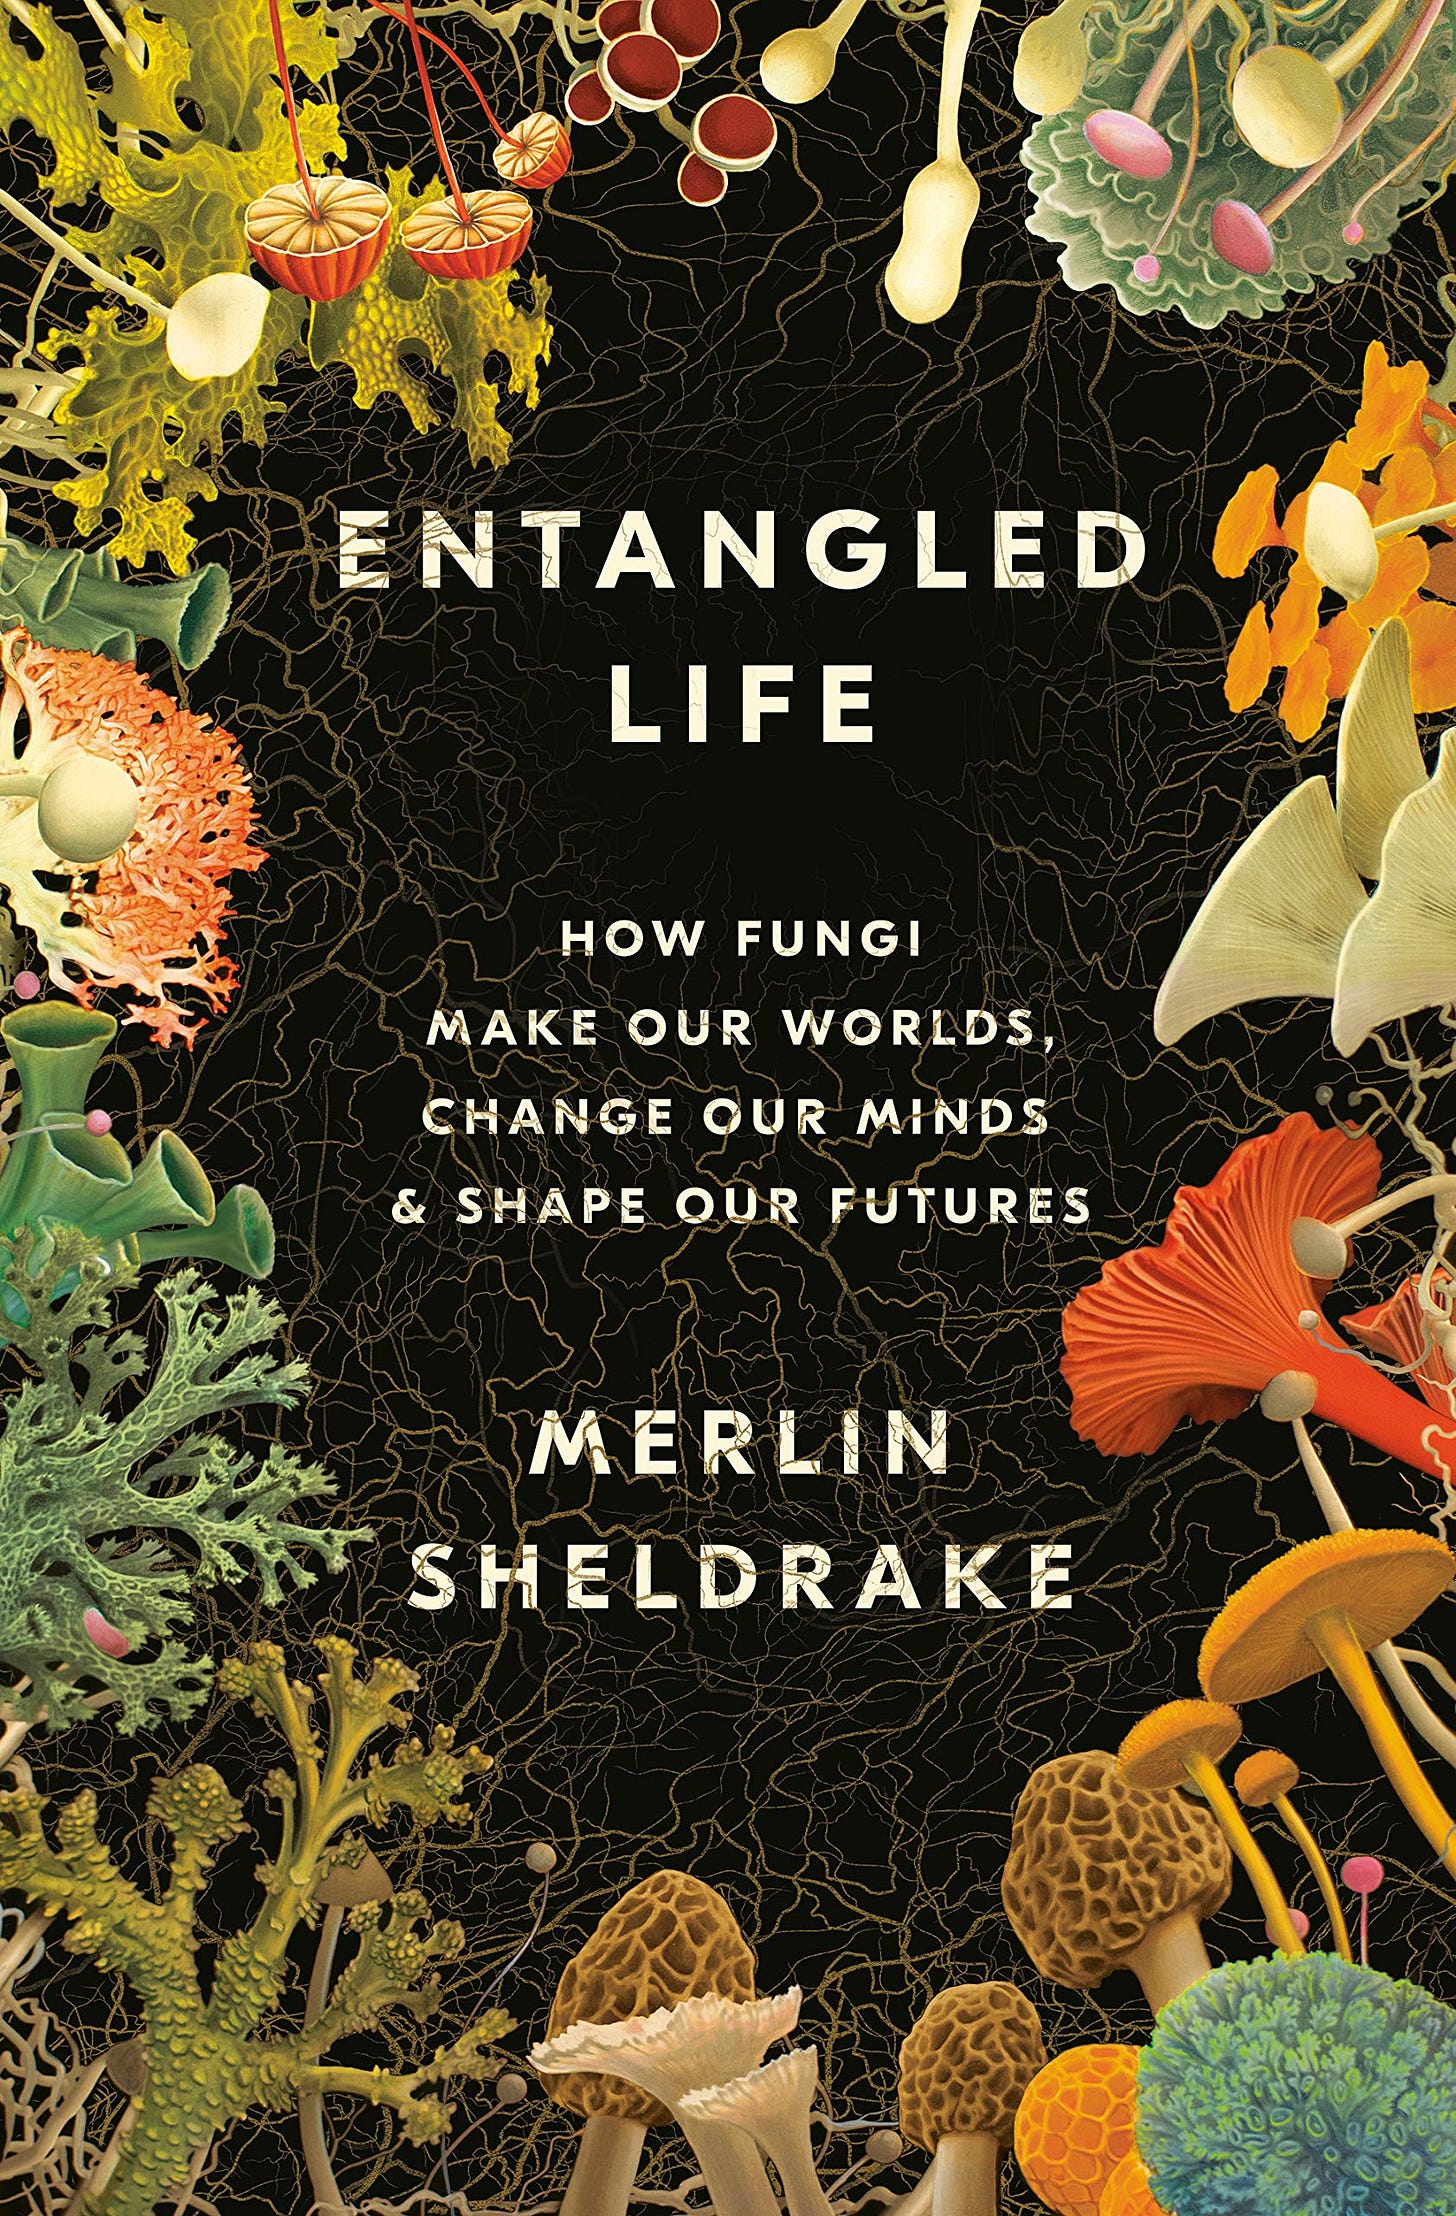 Entangled Life: How Fungi Make Our Worlds, Change Our Minds & Shape Our  Futures: Amazon.co.uk: Sheldrake, Merlin: 9780525510314: Books